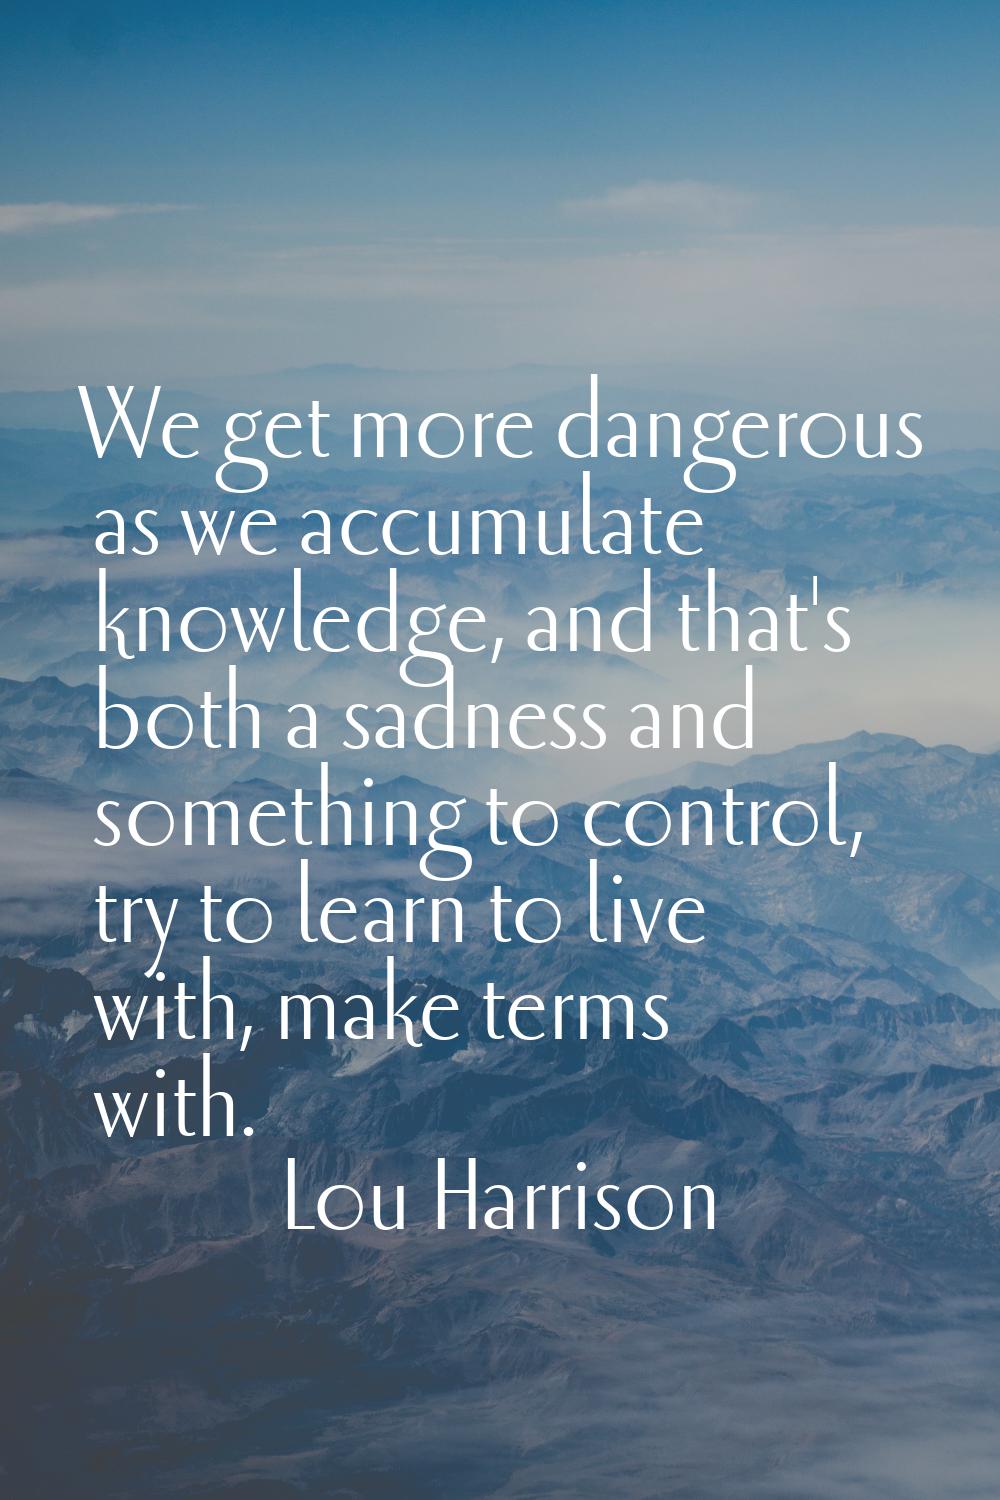 We get more dangerous as we accumulate knowledge, and that's both a sadness and something to contro